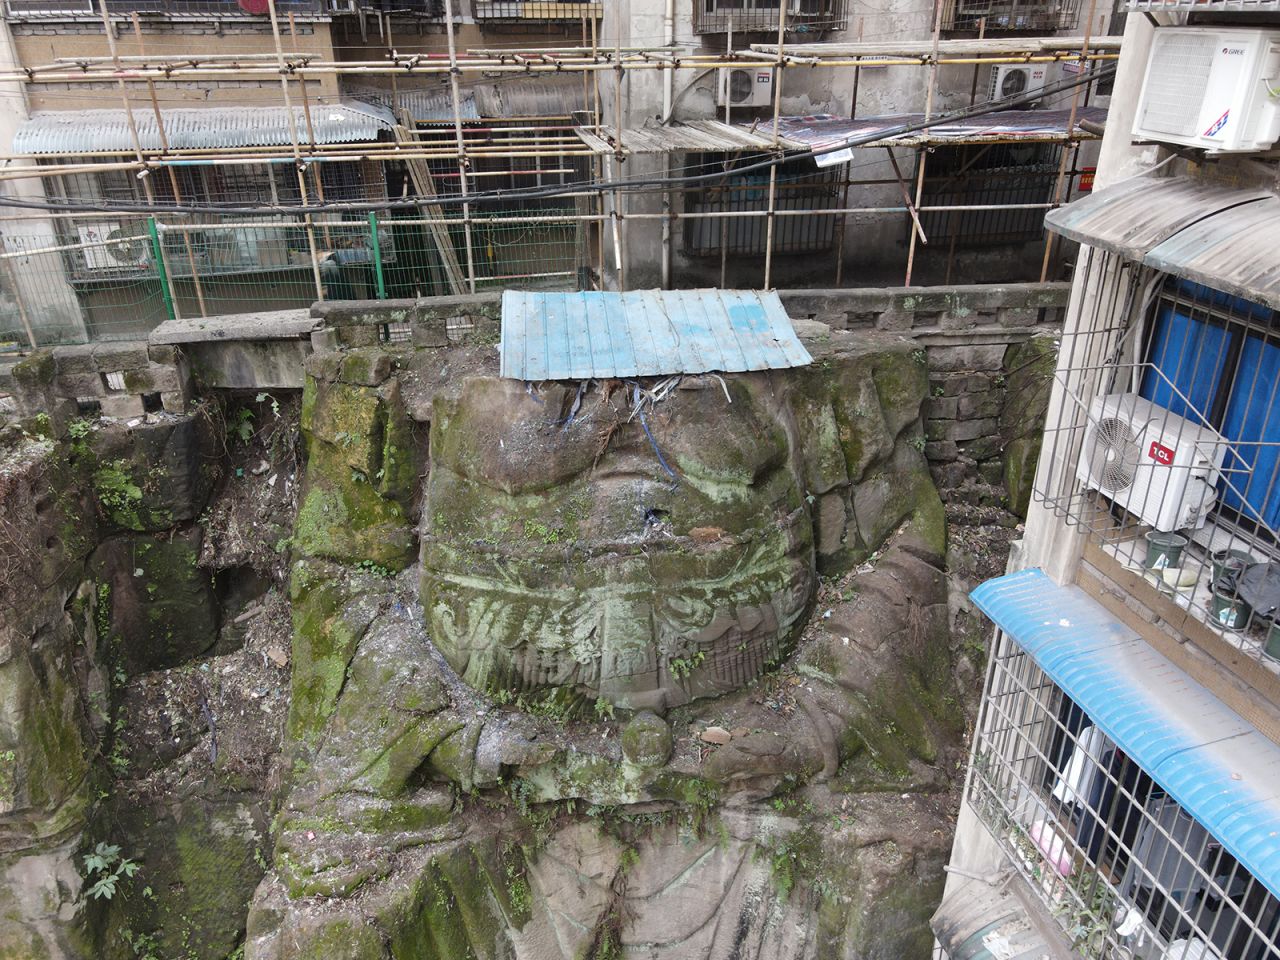 An aerial view of a headless religious statue uncovered in Chongqing, China.